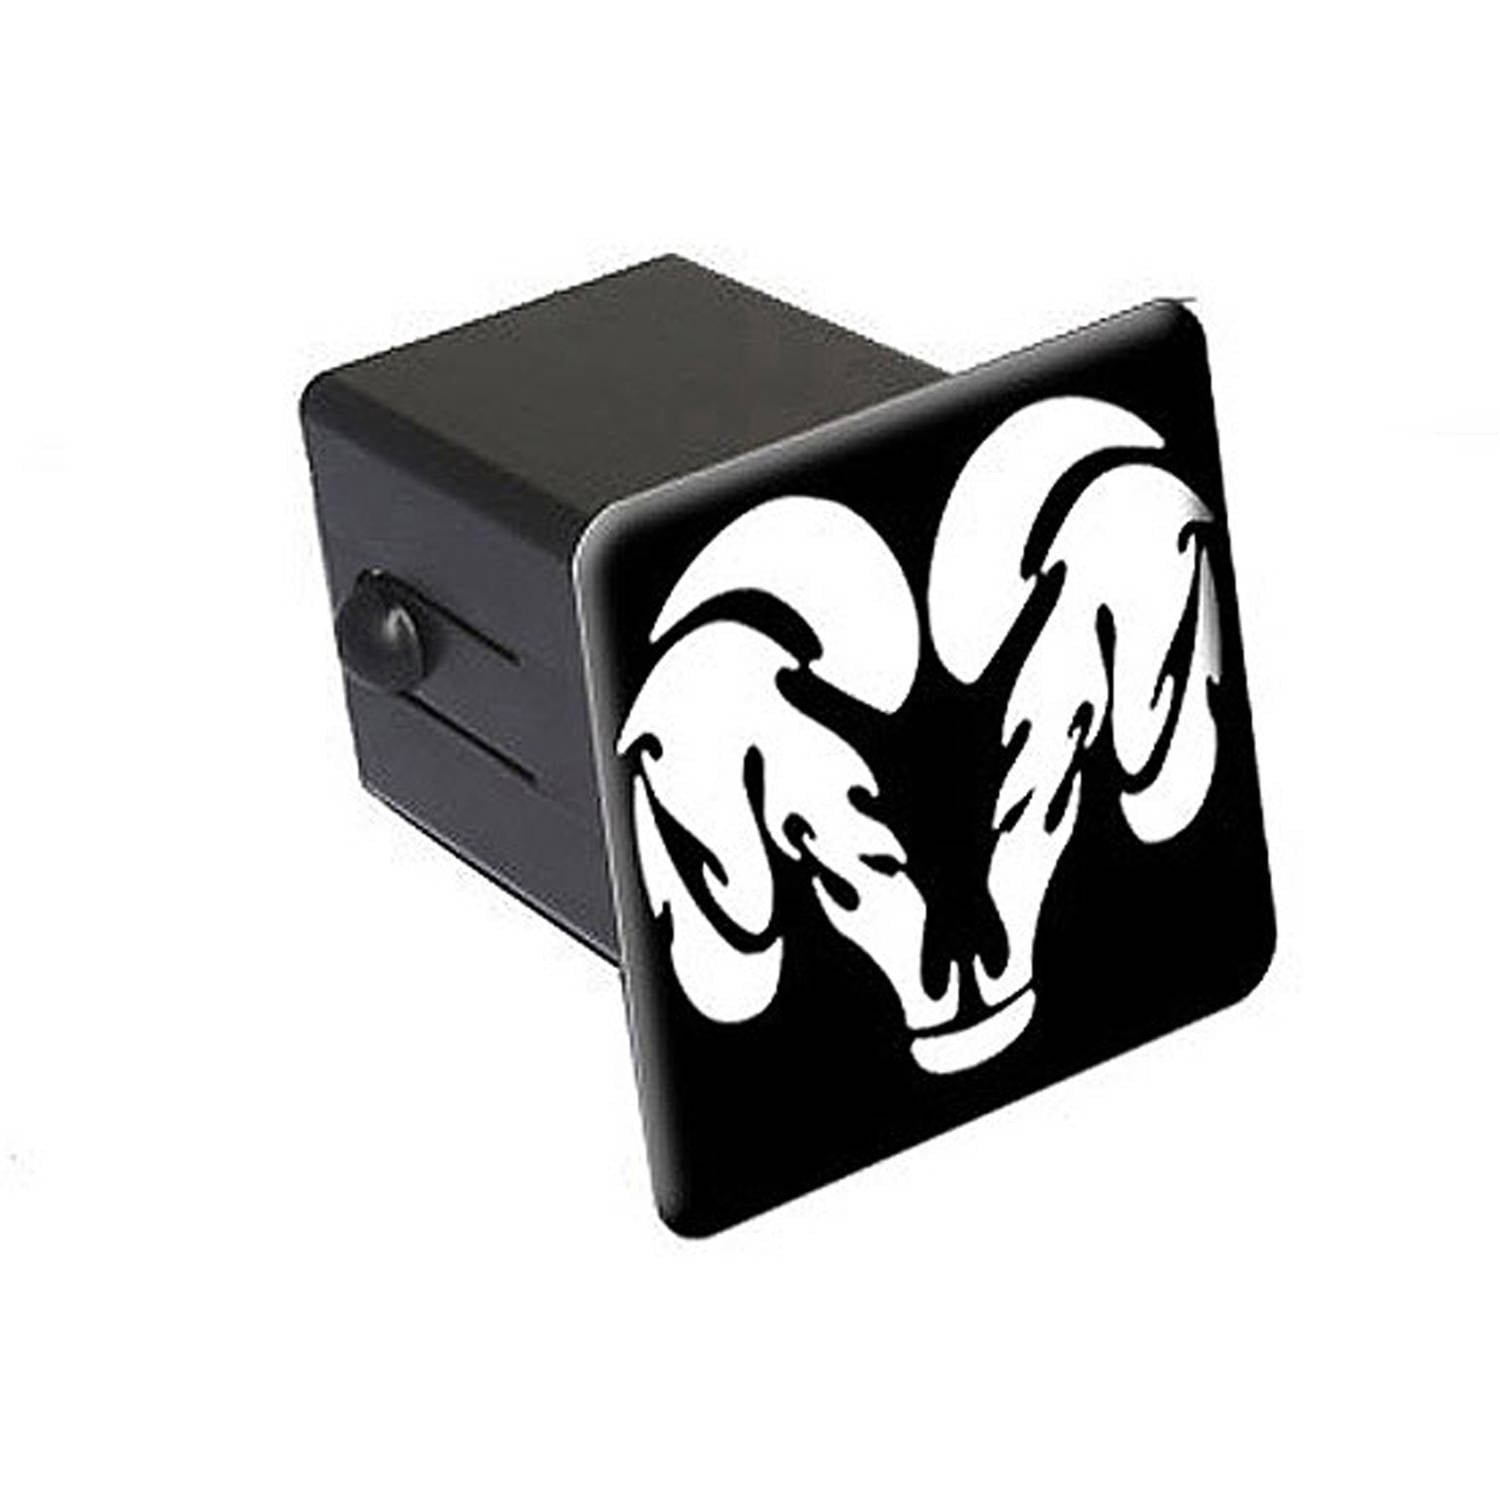 Graphics and More Ram Head White On Black 2 Tow Trailer Hitch Cover Plug Insert 